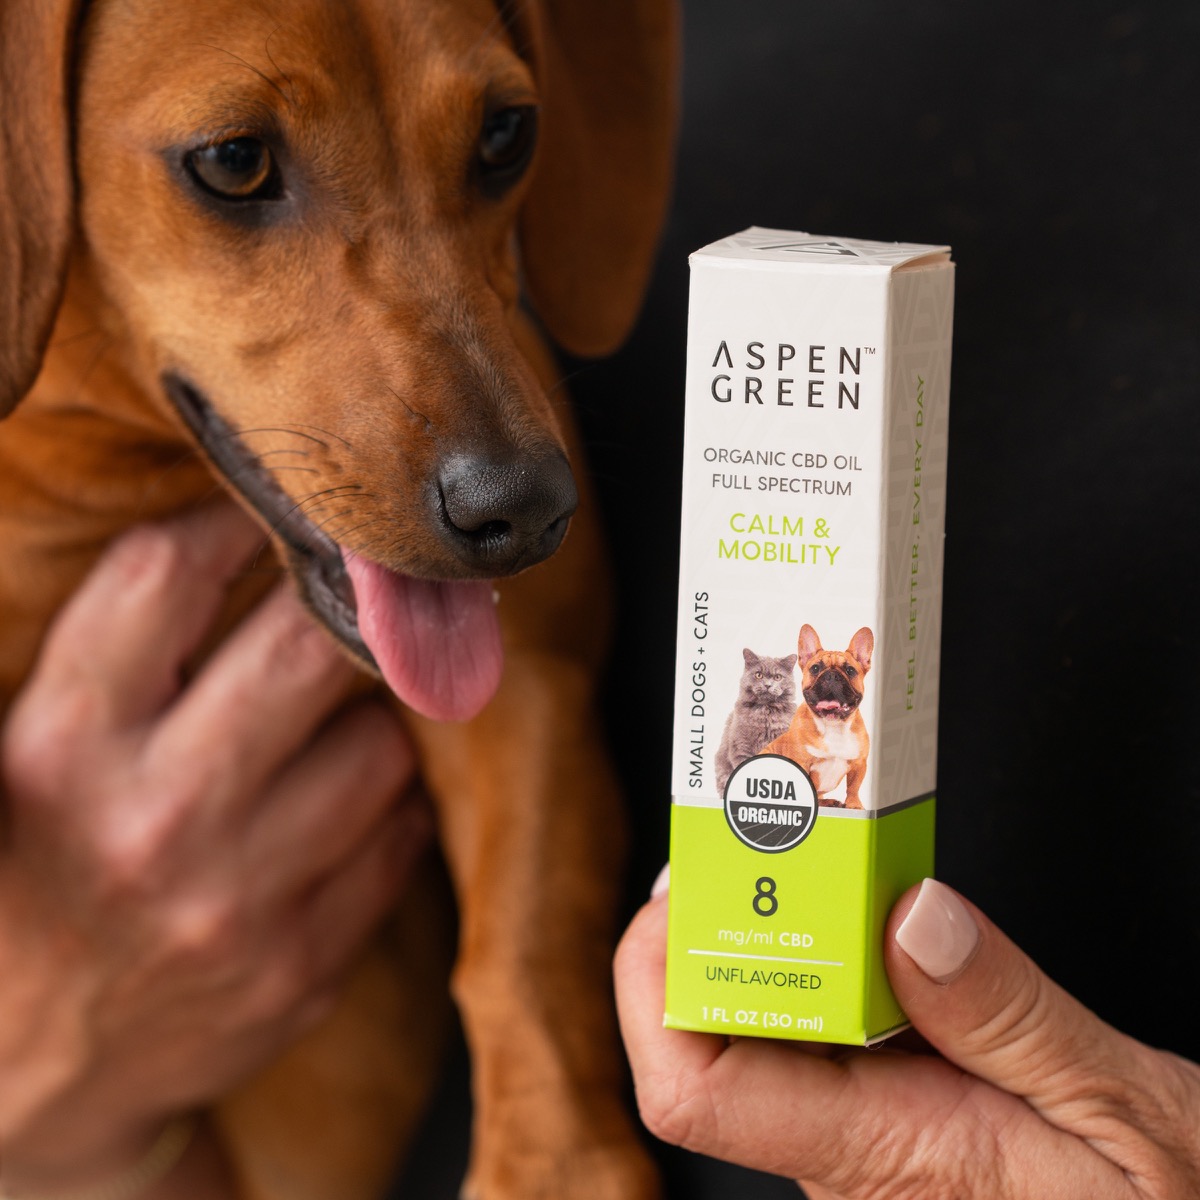 Aspen Green Small Dog Unflavored CBD Oil Box with Dachshund